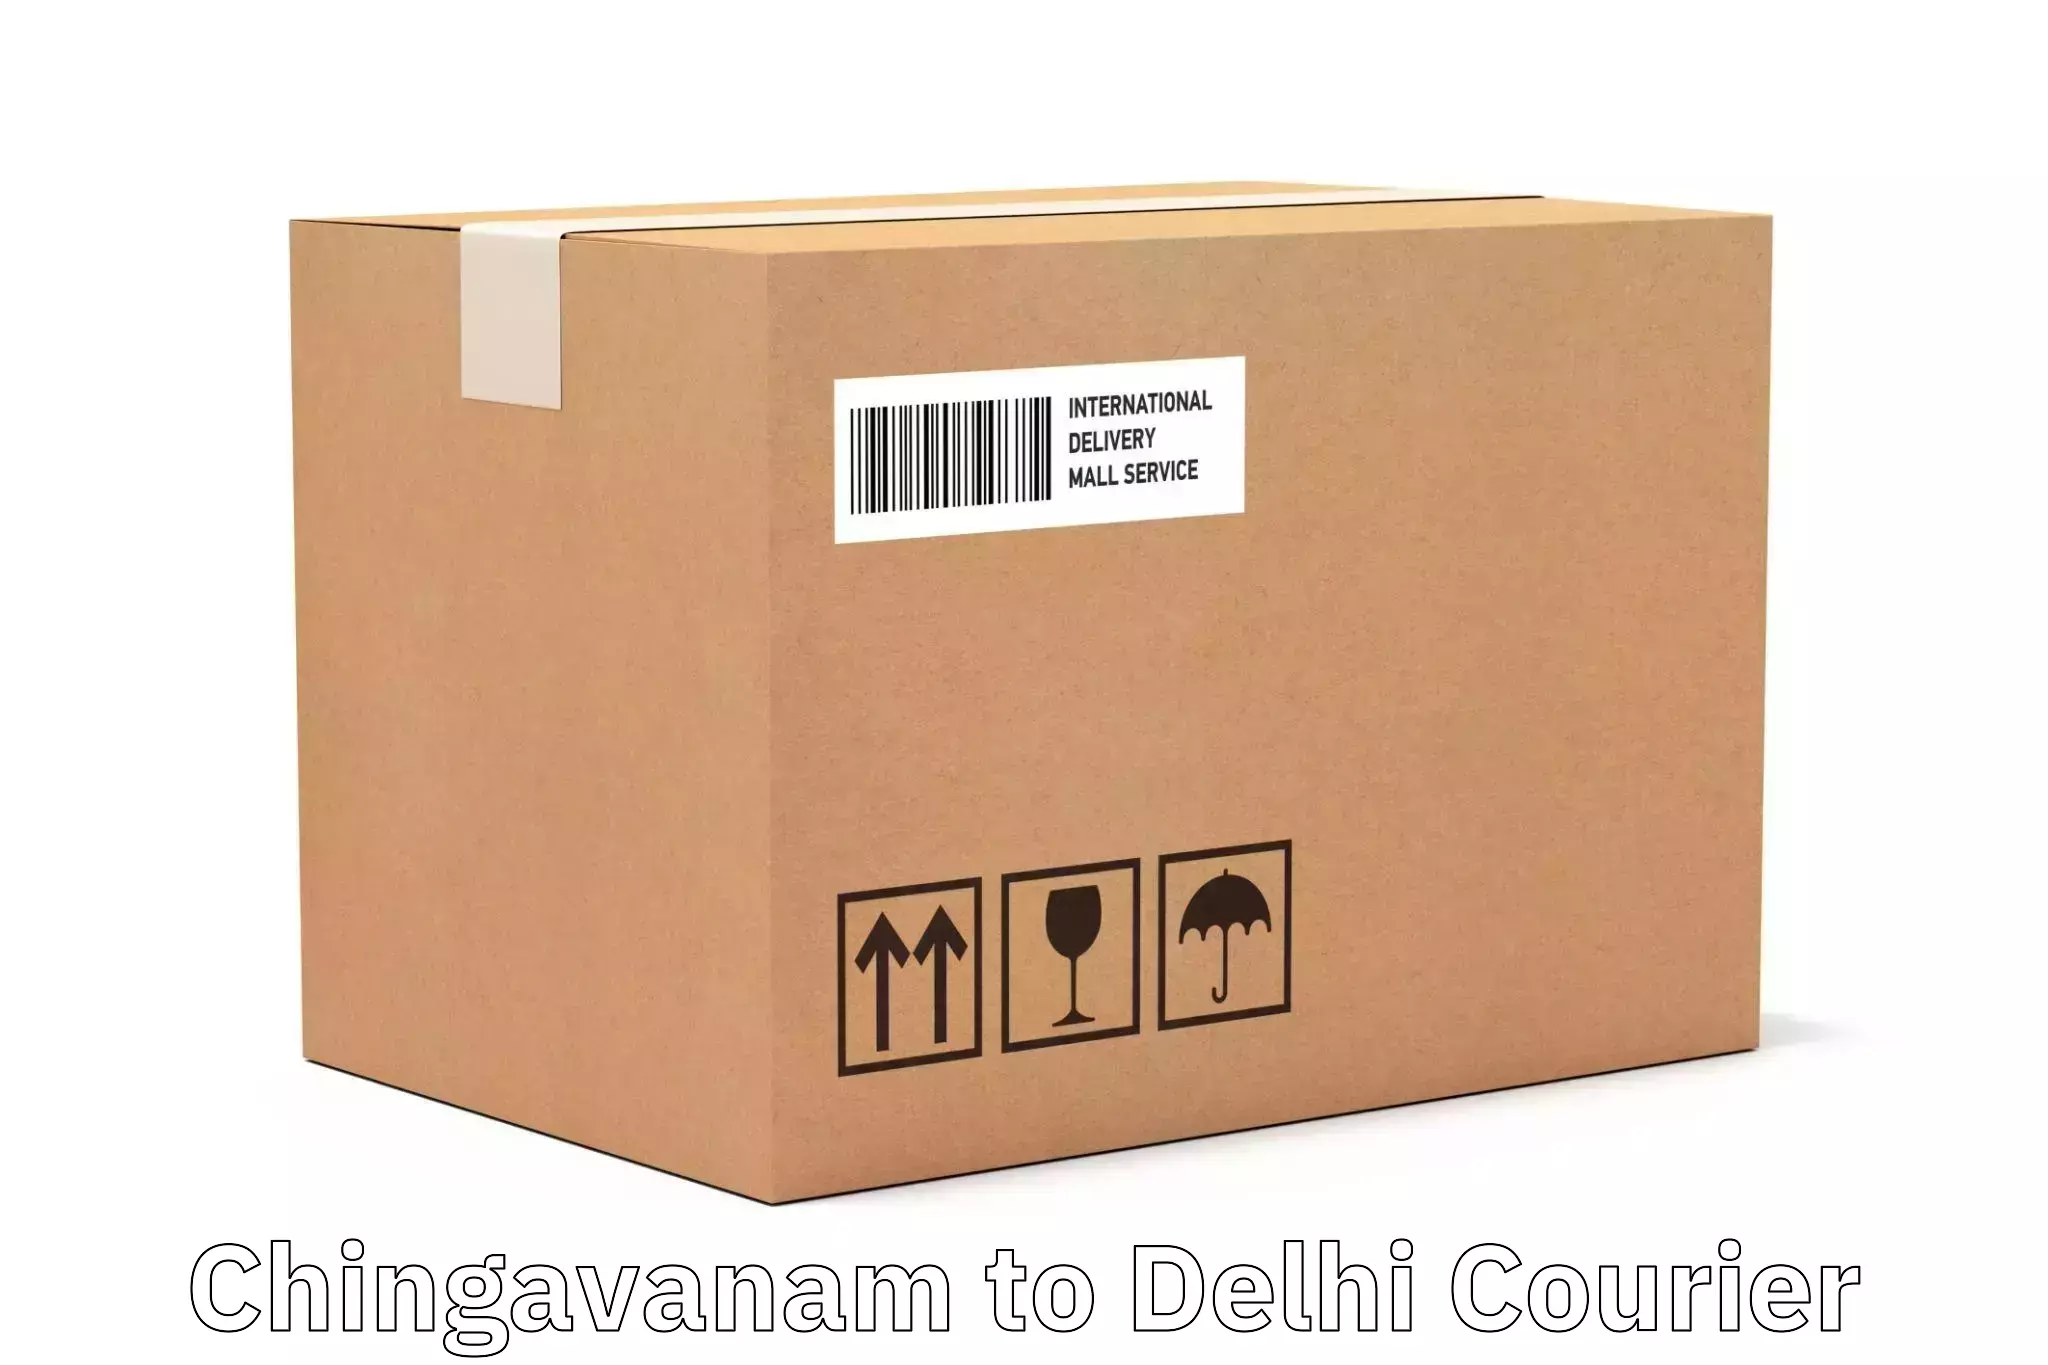 Global shipping solutions Chingavanam to NCR